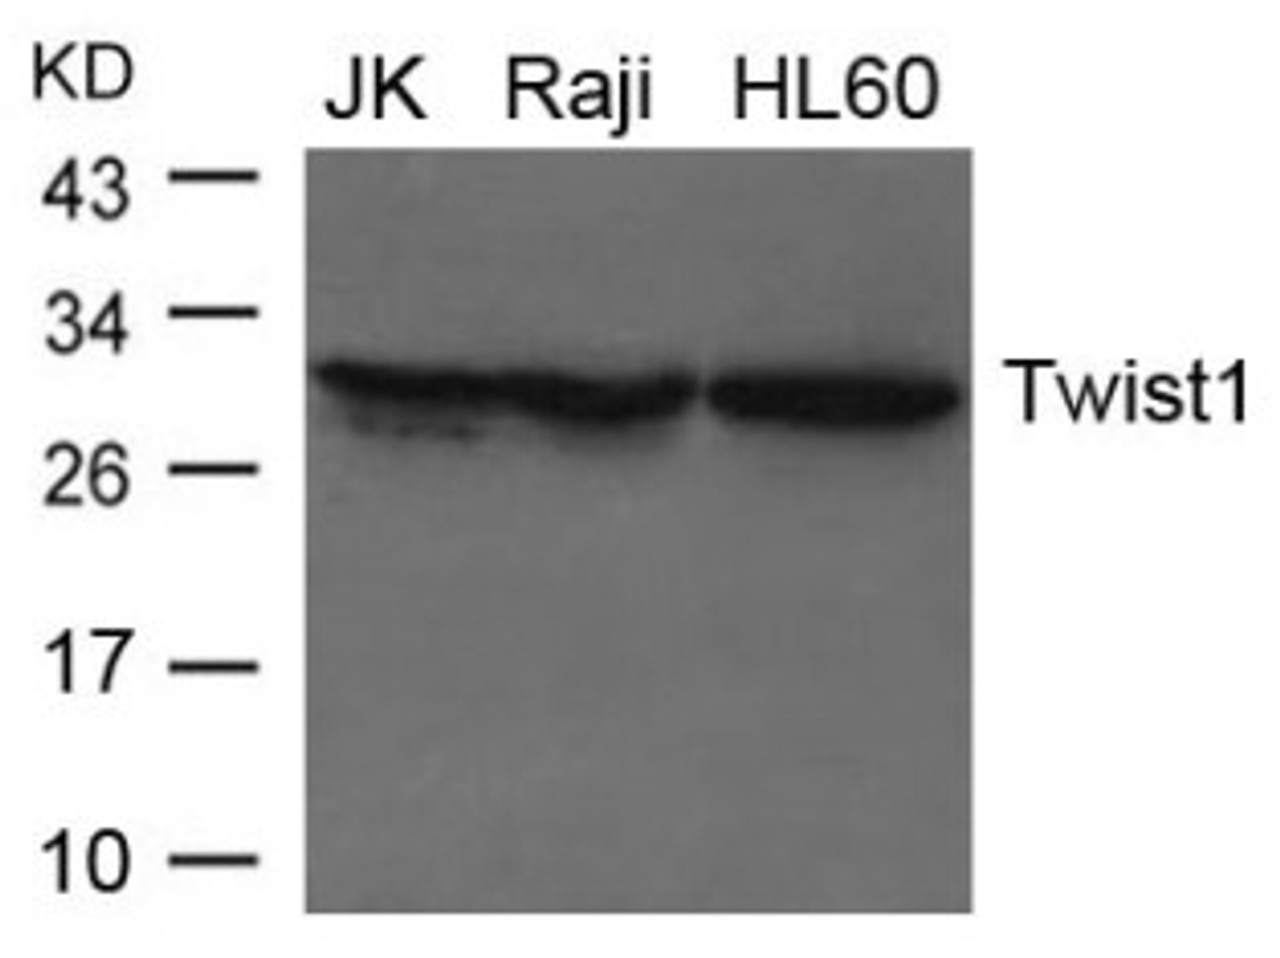 Western blot analysis of lysed extracts from JK, Raji and HL-60 cells using Twist1 Antibody.